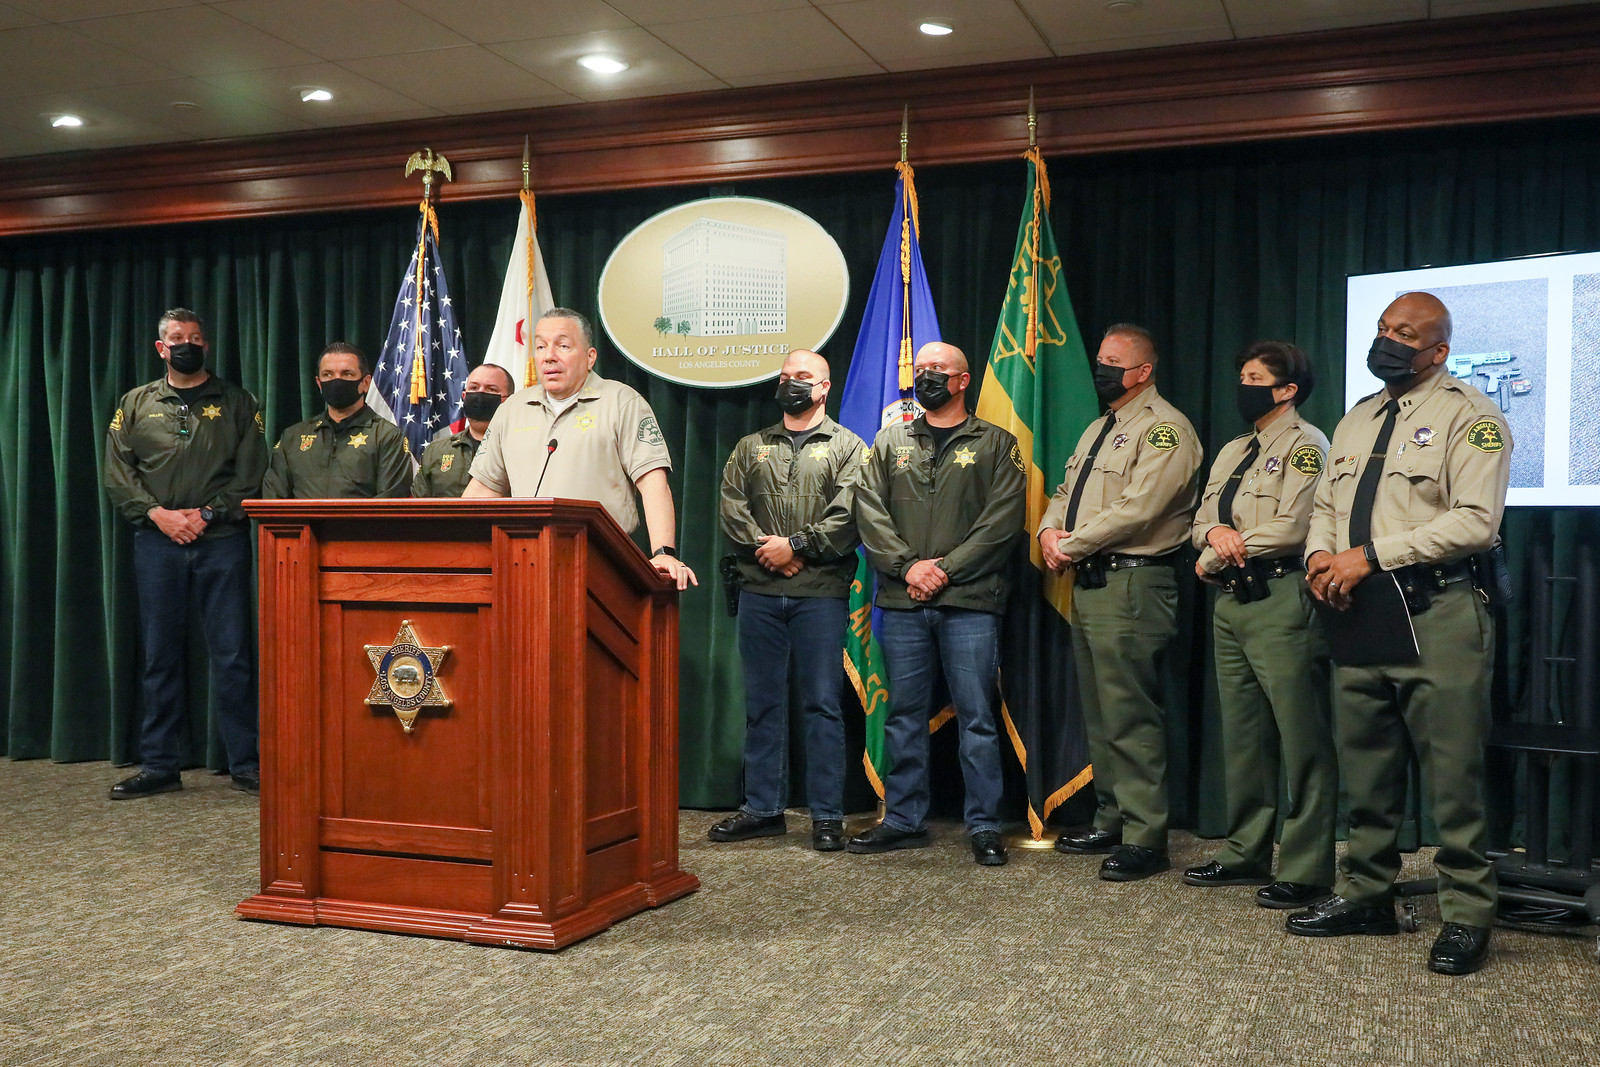 picture of Sheriff Alex Villanueva standing at a podium speaking to the audience. The podium is brown and has the Sheriff's Badge on the front. There are 8 other personel from O S S behind the Sheriff. A screen is off to the right behind O S S Captain with pictures of two guns on the screen.